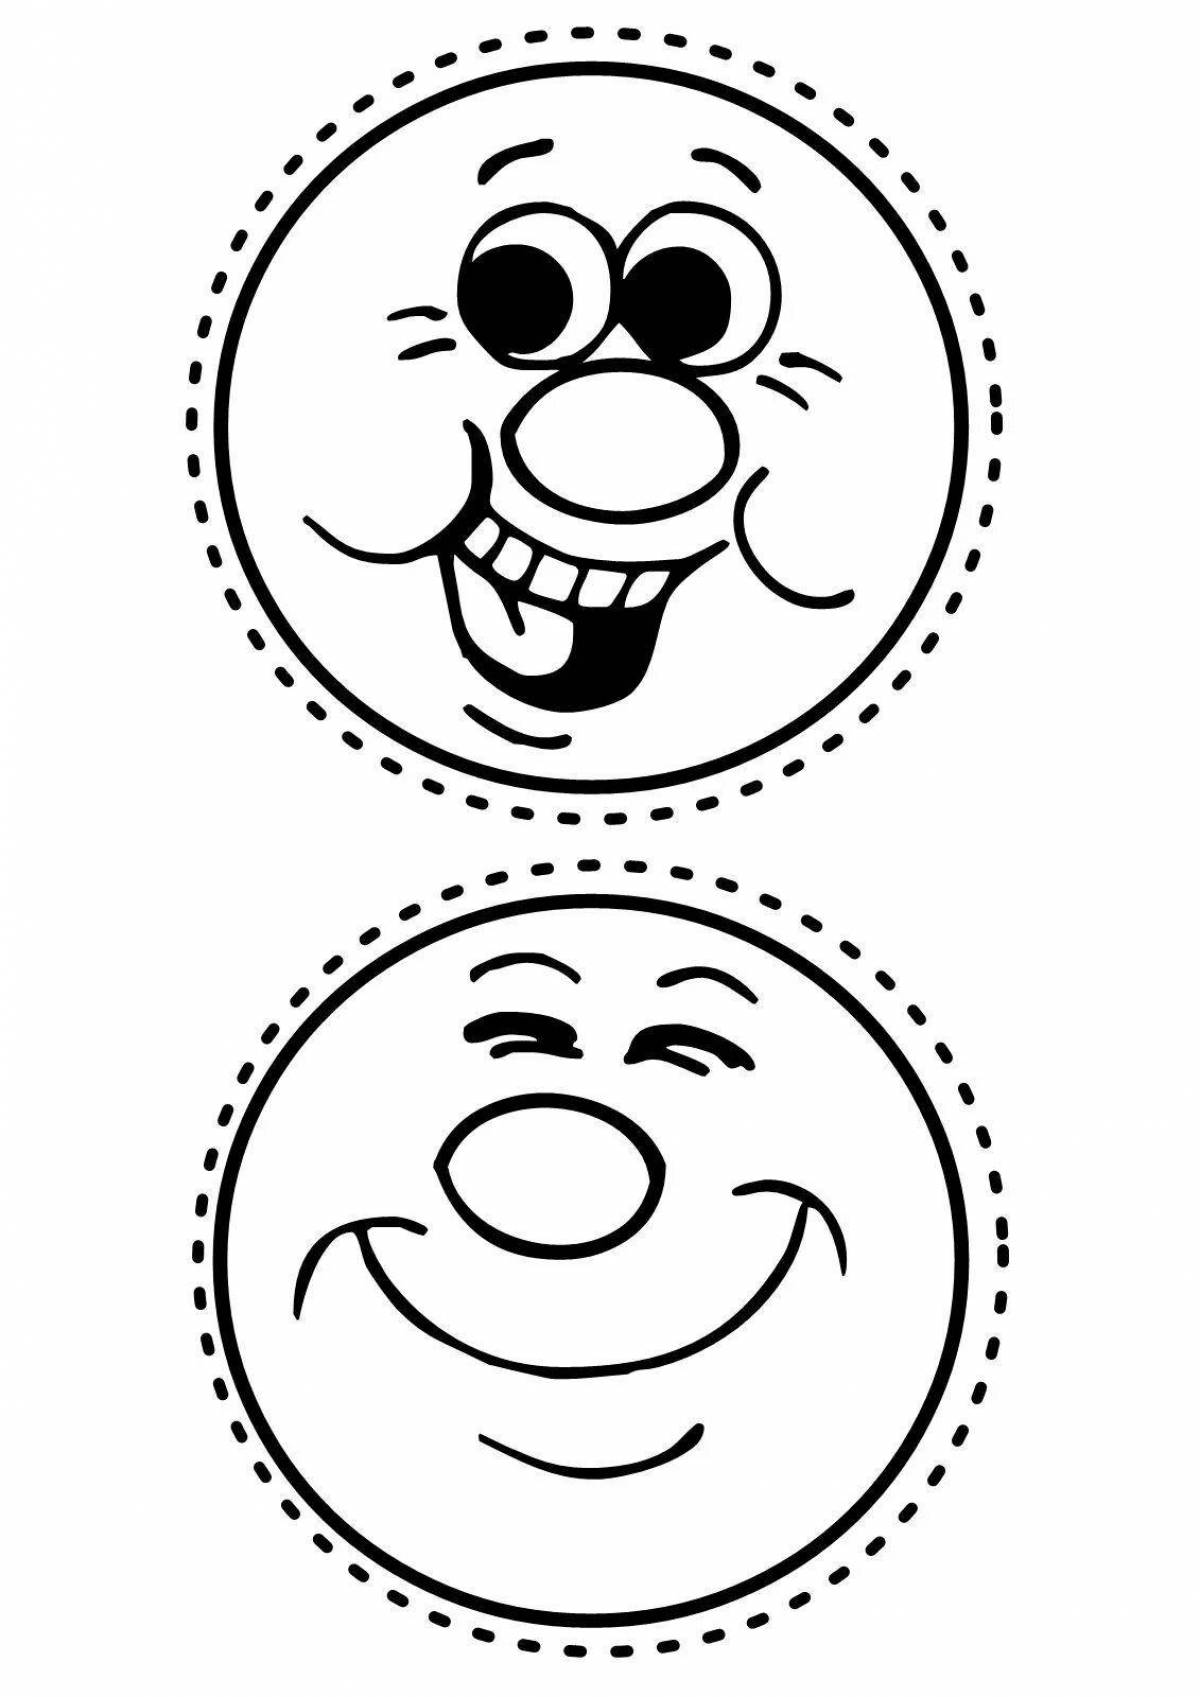 Delight emotion coloring page for kids